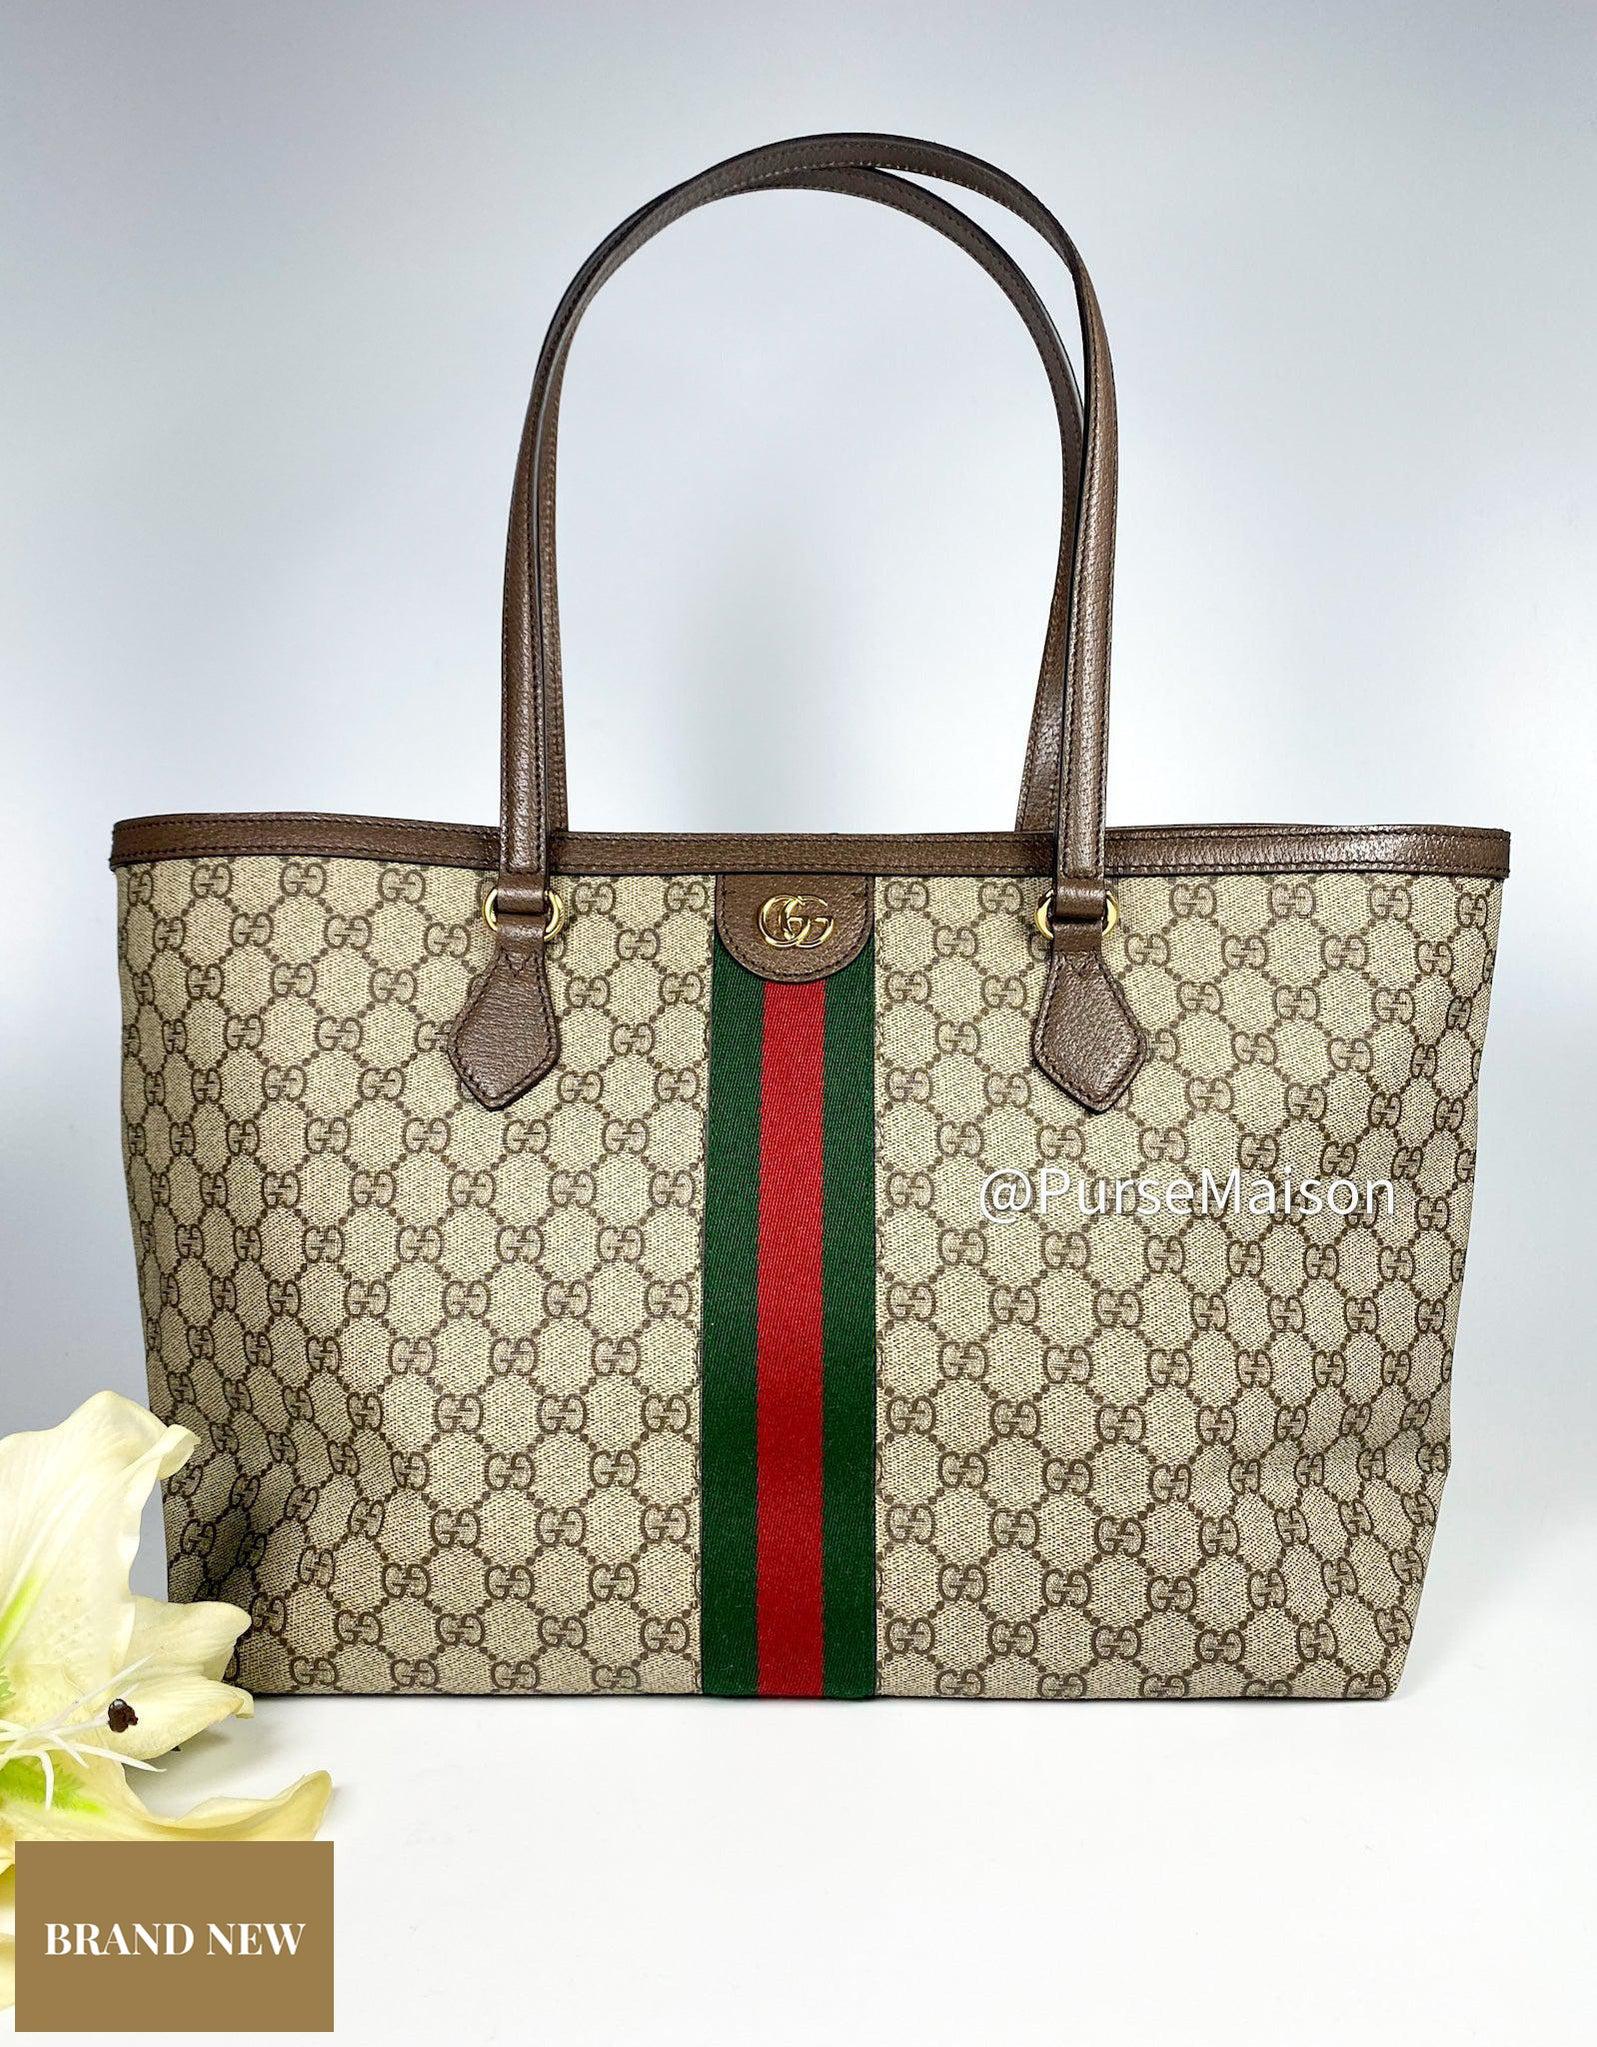 Gucci Ophidia GG Medium Tote Bag in Beige and Ebony